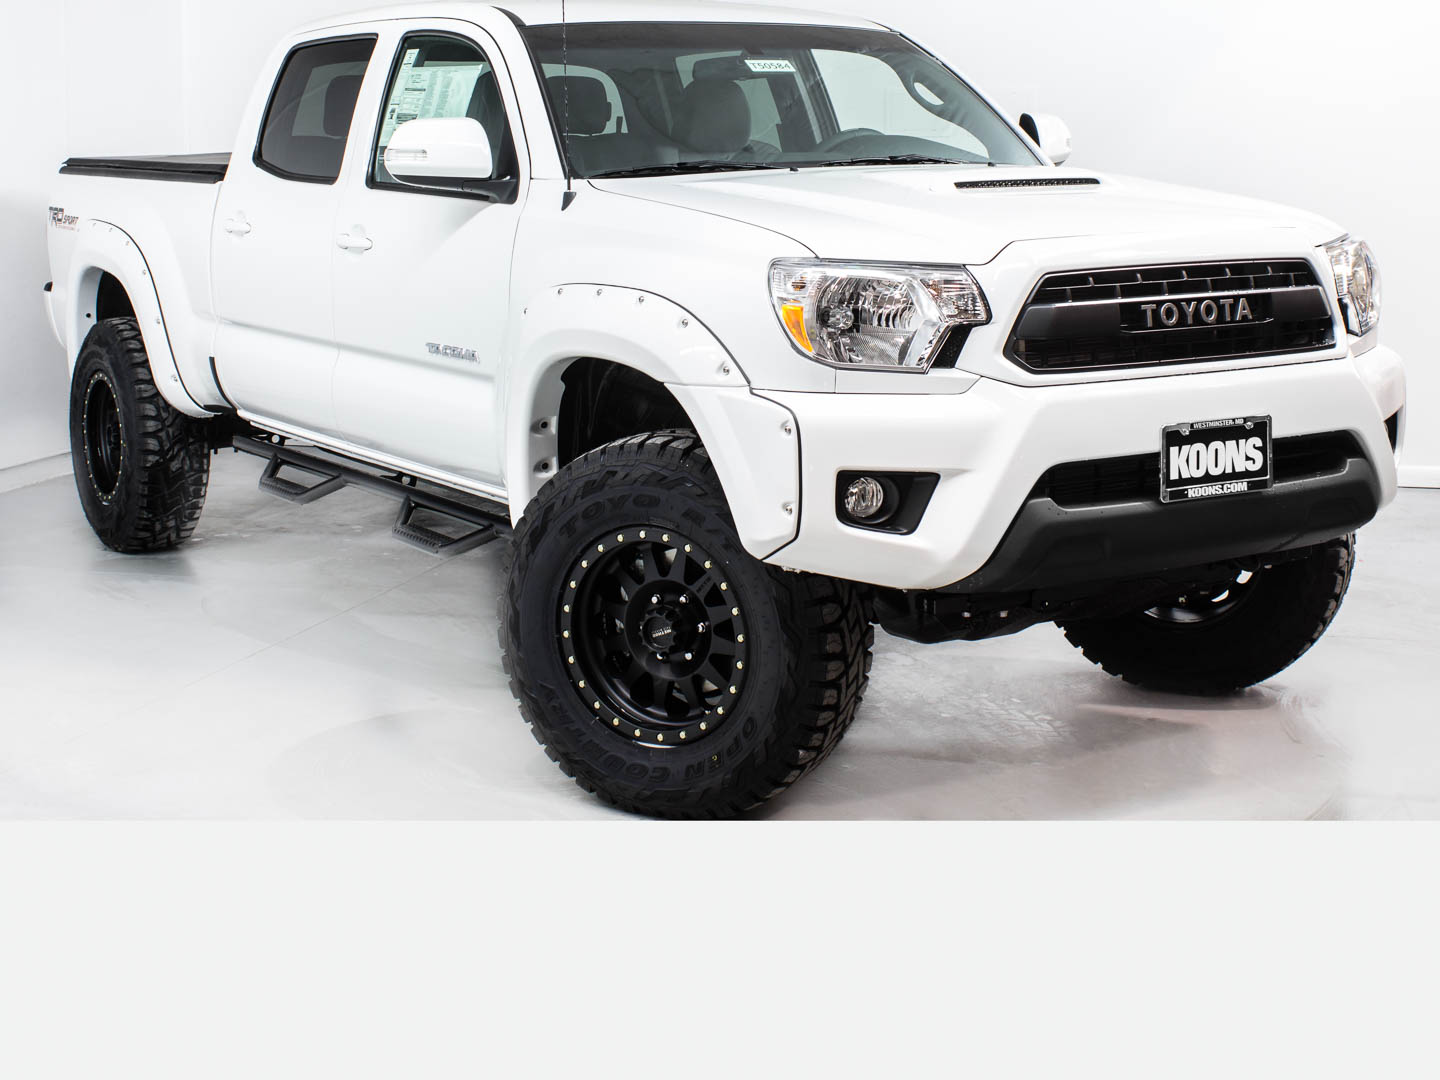 Toyota Tacoma , HD Wallpaper & Backgrounds